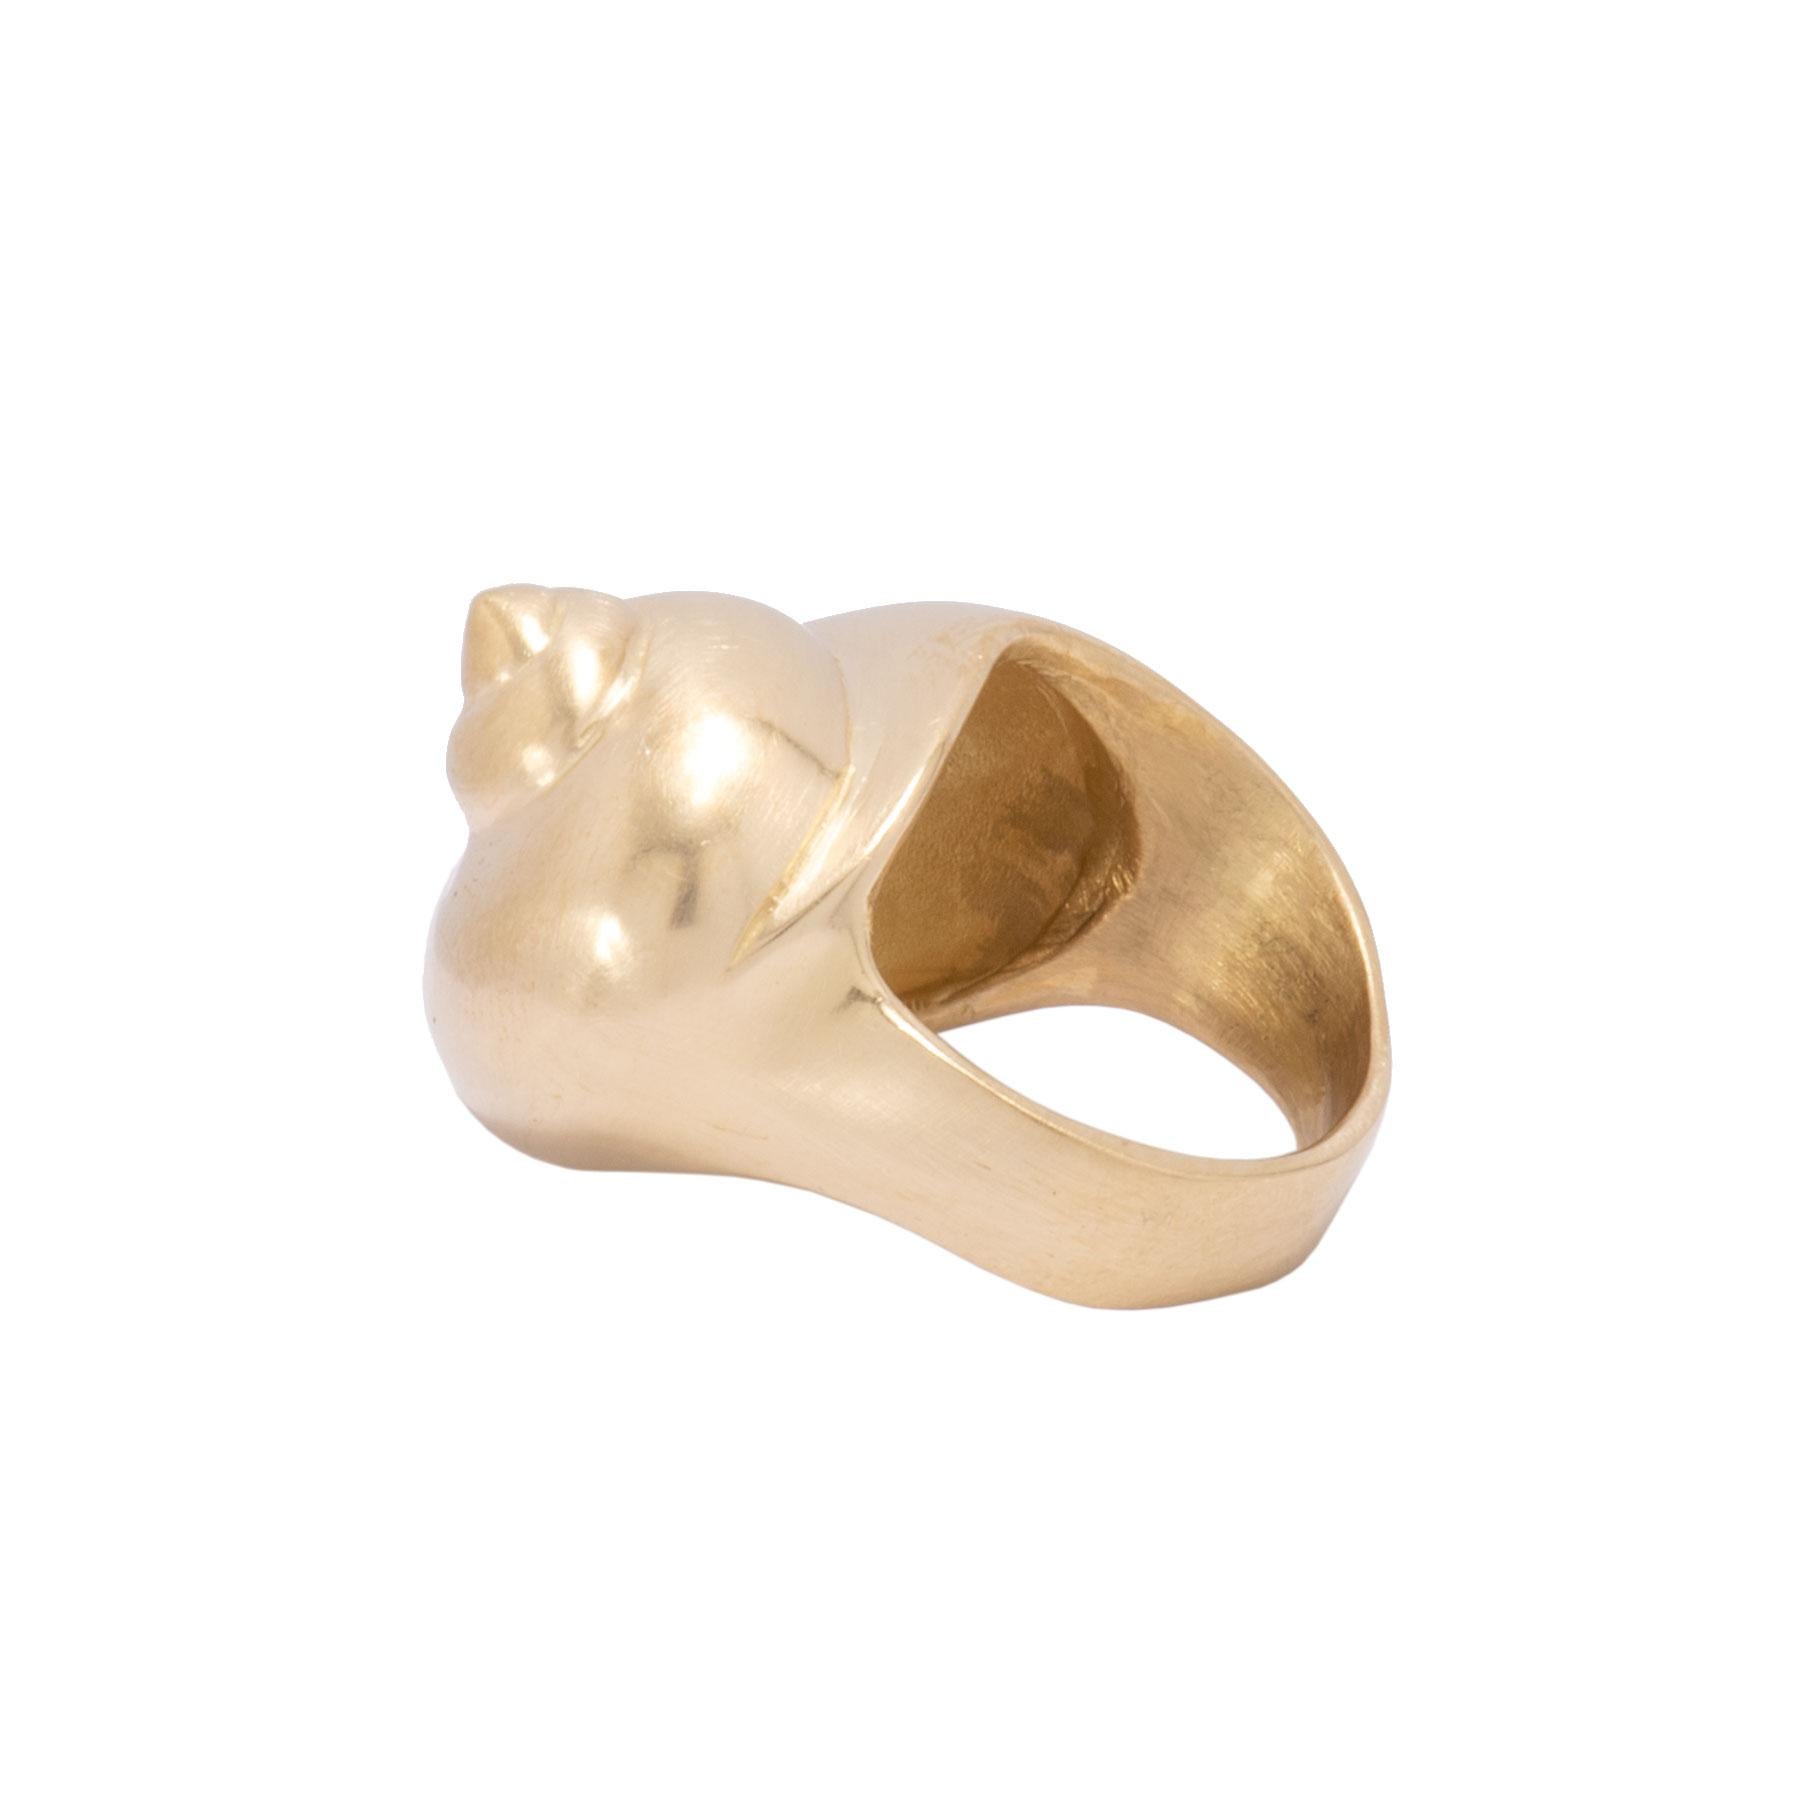 Large Turban Shell Ring in 18 Karat Gold For Sale 1